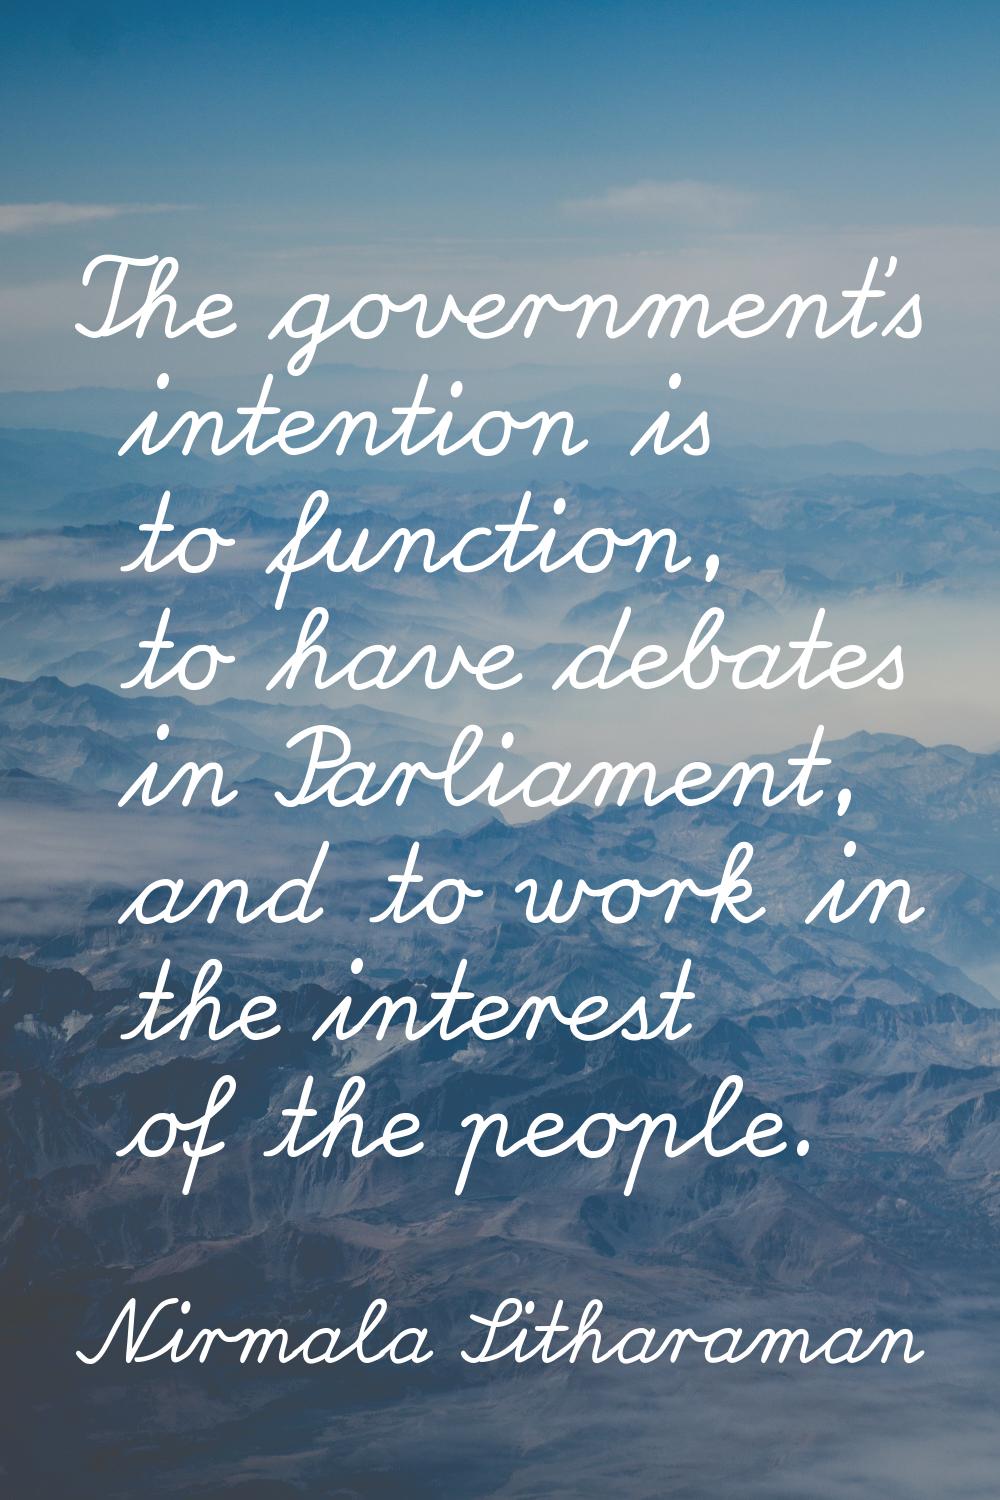 The government's intention is to function, to have debates in Parliament, and to work in the intere